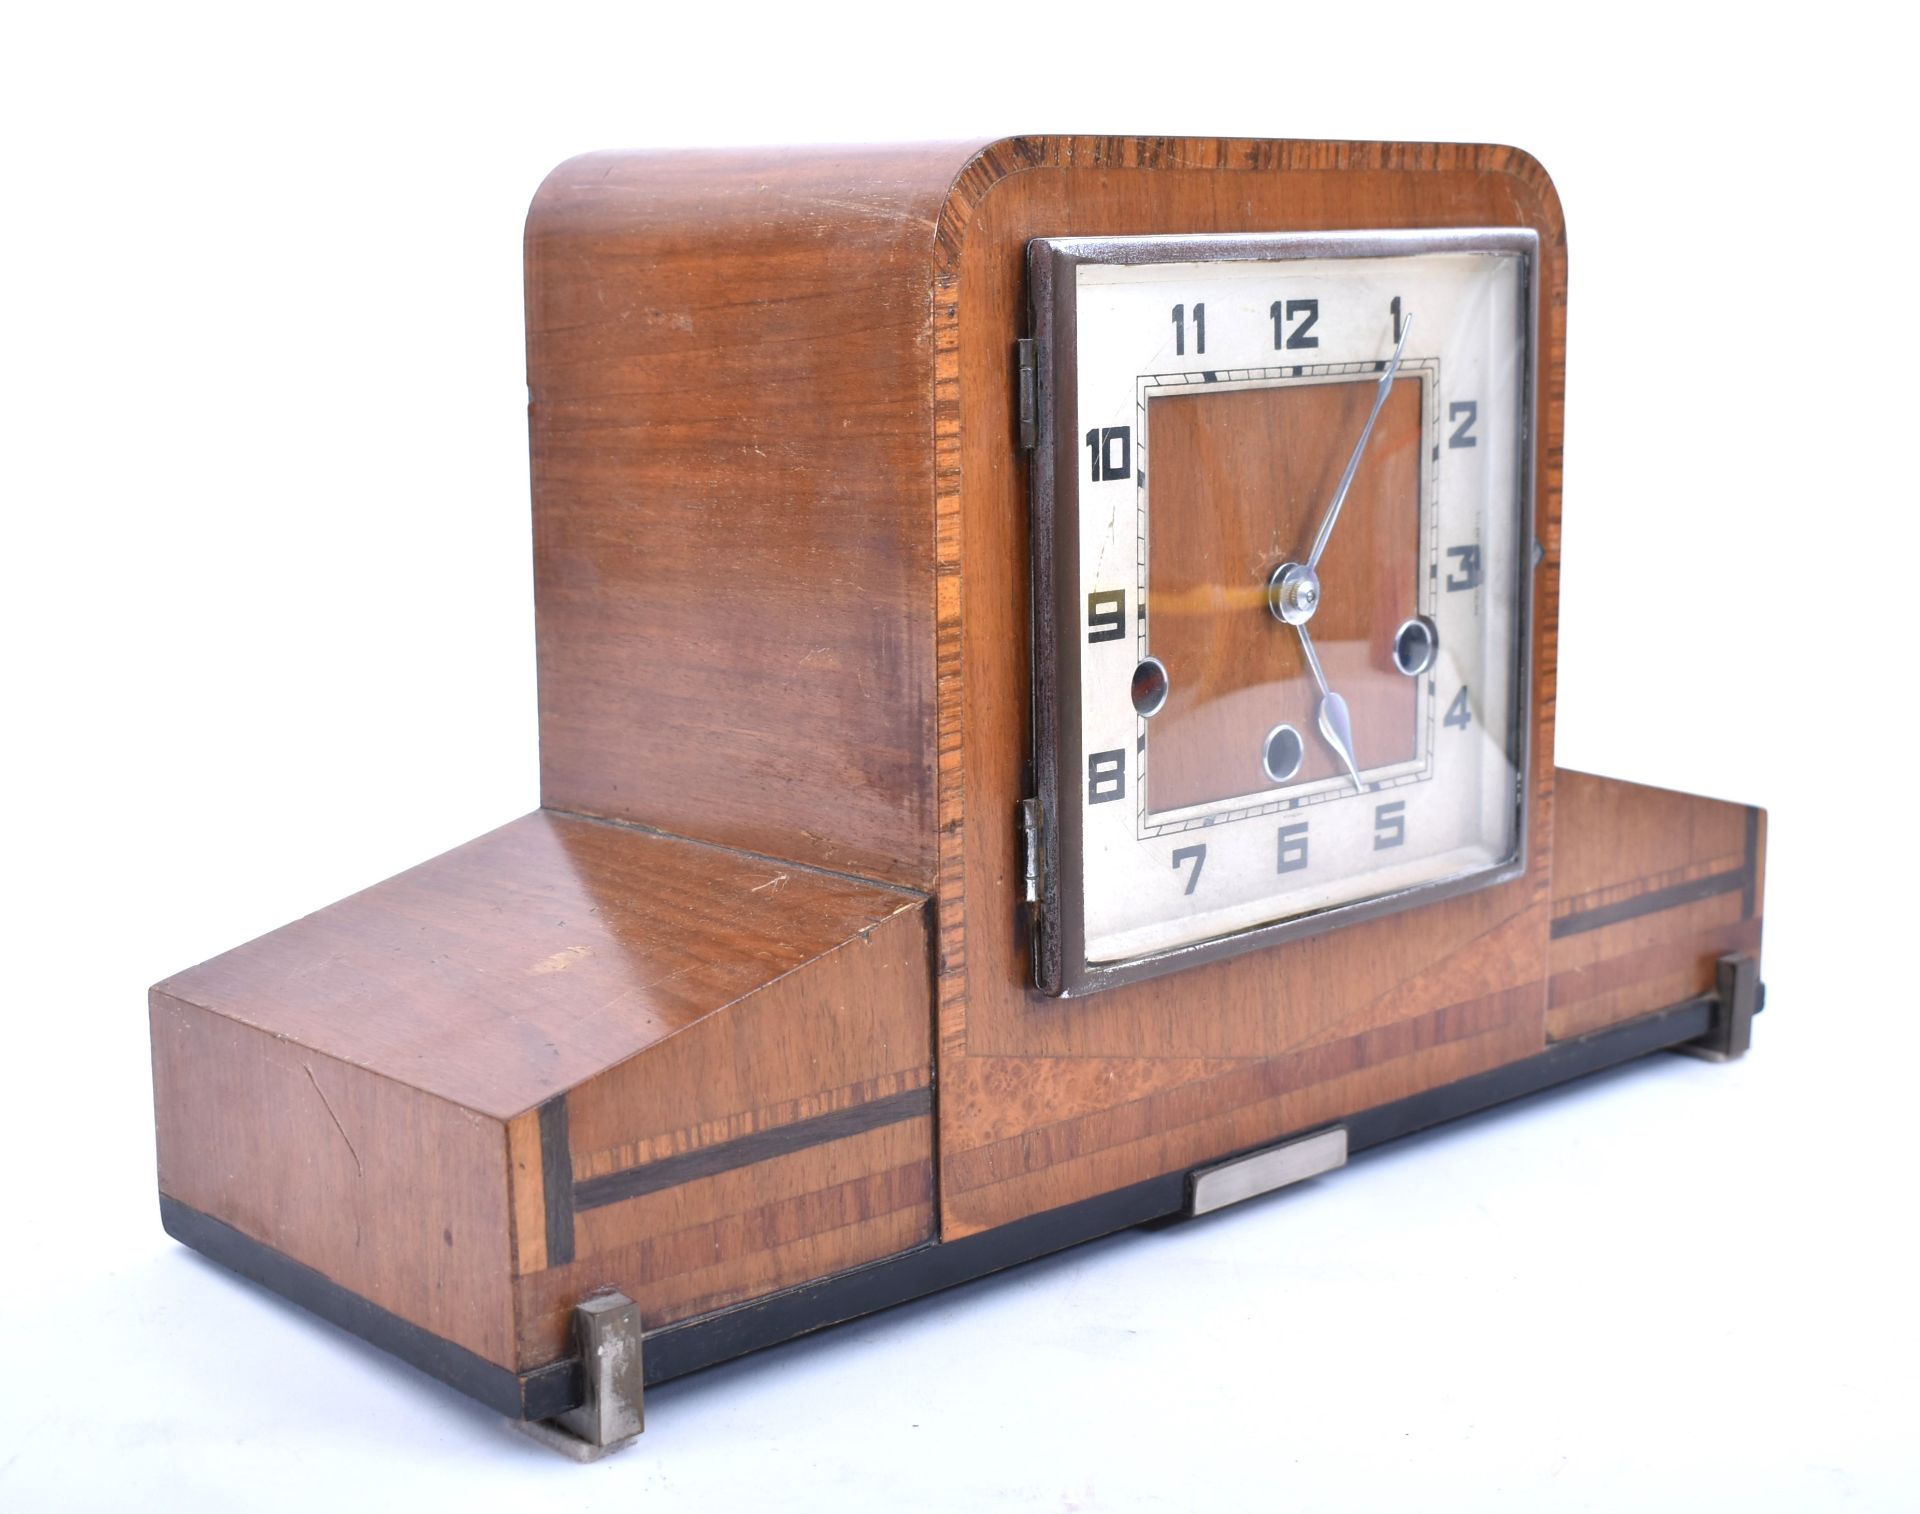 ART DECO STYLE WESTMINSTER CHIME WALNUT MANTEL CLOCK - Image 3 of 8